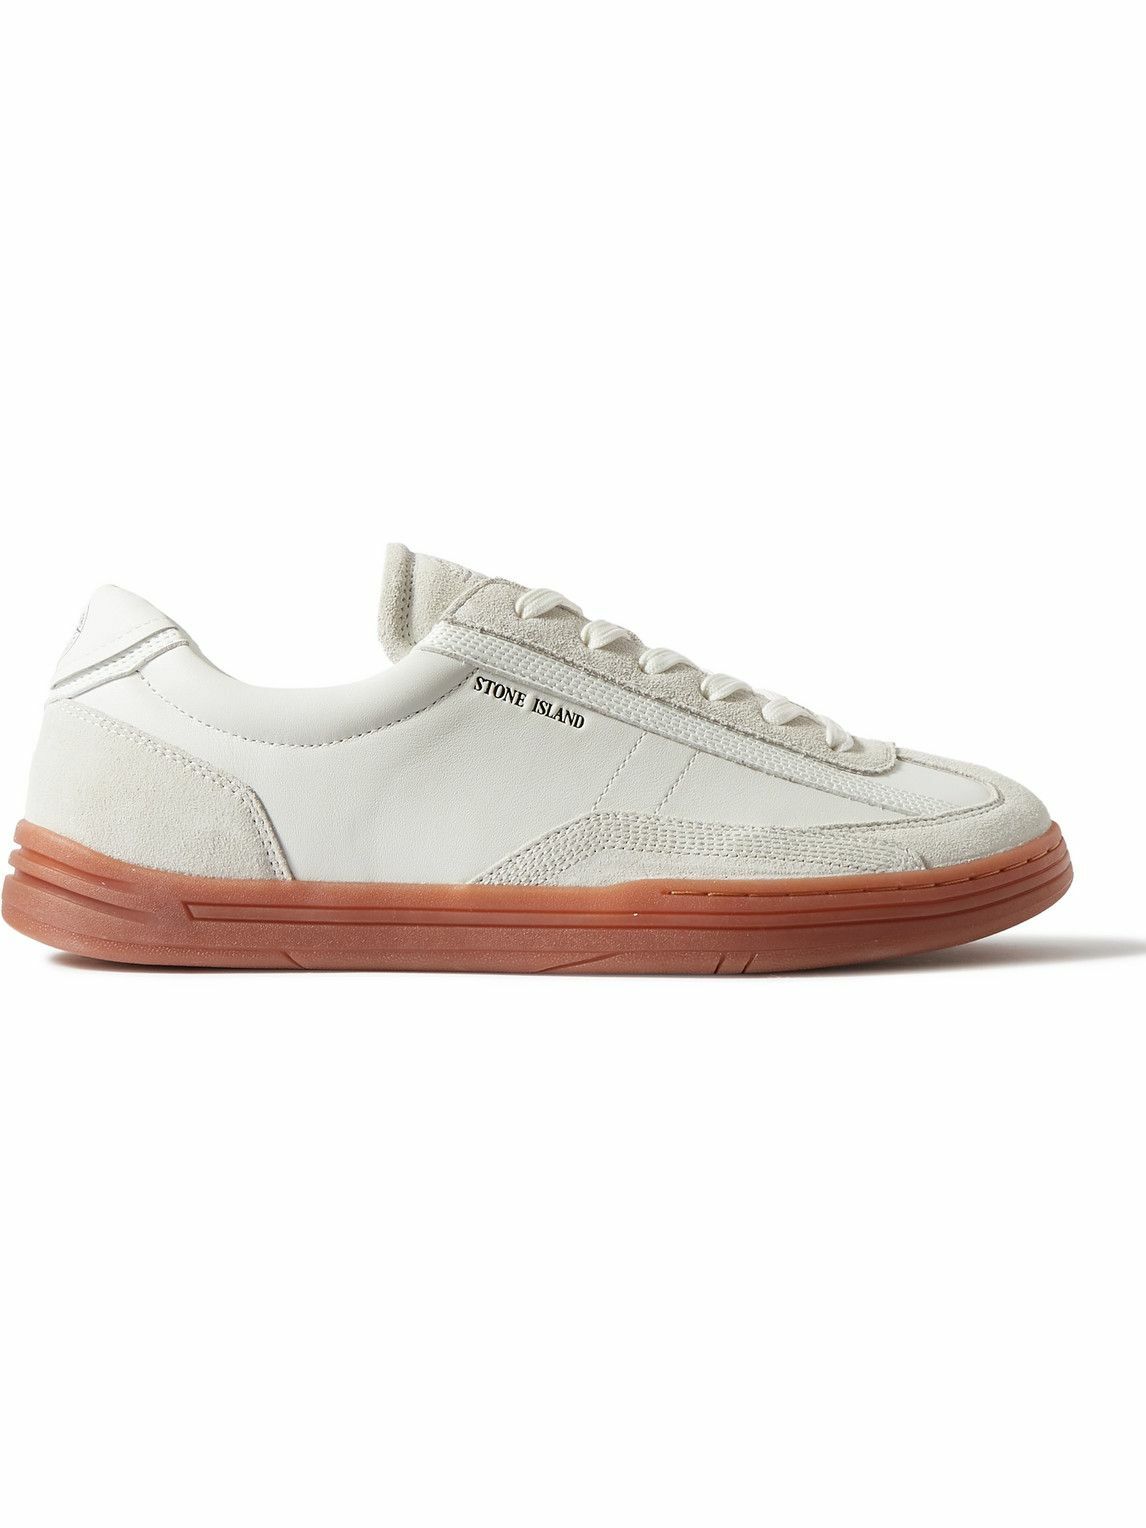 Photo: Stone Island - Rock Suede-Trimmed Leather Sneakers - White